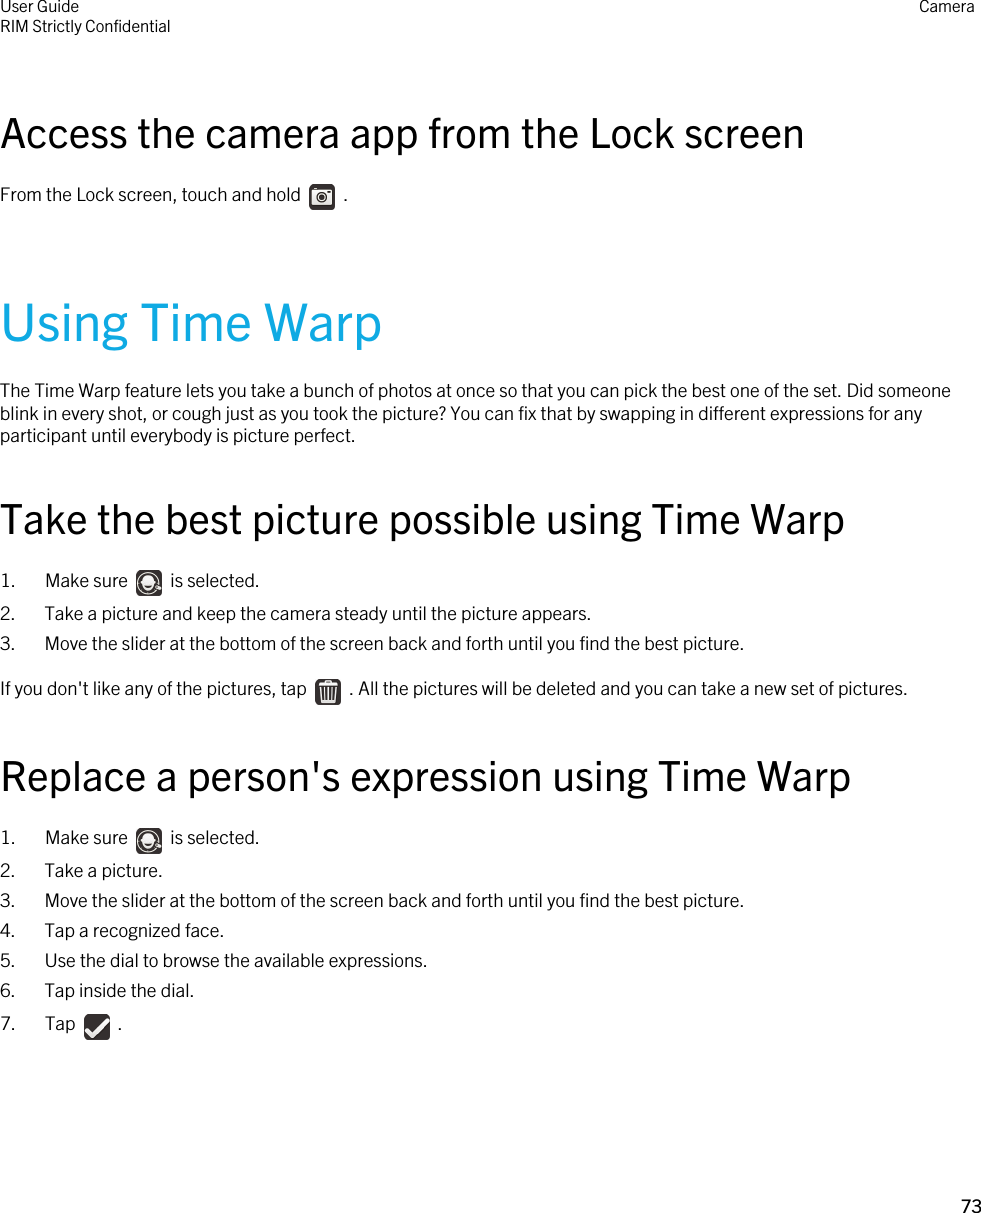 Access the camera app from the Lock screenFrom the Lock screen, touch and hold    .Using Time WarpThe Time Warp feature lets you take a bunch of photos at once so that you can pick the best one of the set. Did someone blink in every shot, or cough just as you took the picture? You can fix that by swapping in different expressions for any participant until everybody is picture perfect.Take the best picture possible using Time Warp1.  Make sure    is selected.2. Take a picture and keep the camera steady until the picture appears.3. Move the slider at the bottom of the screen back and forth until you find the best picture.If you don&apos;t like any of the pictures, tap    . All the pictures will be deleted and you can take a new set of pictures.Replace a person&apos;s expression using Time Warp1.  Make sure    is selected.2. Take a picture.3. Move the slider at the bottom of the screen back and forth until you find the best picture.4. Tap a recognized face.5. Use the dial to browse the available expressions.6. Tap inside the dial.7.  Tap    .User GuideRIM Strictly ConfidentialCamera73 